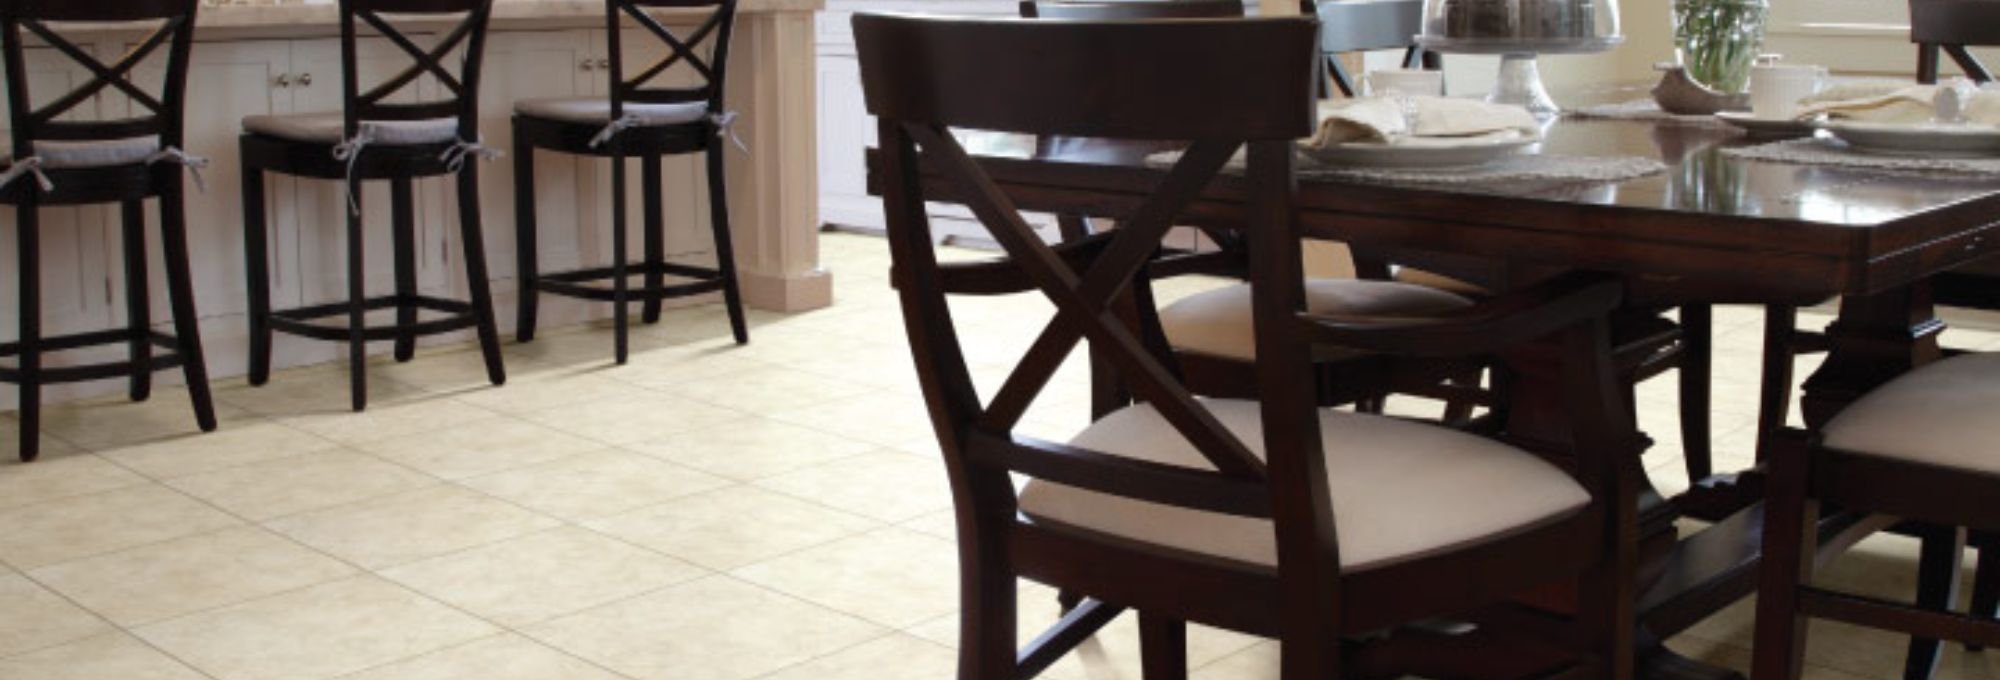 Chairs and tiles from Zinz Design and Selection Center Inc in Austintown, OH